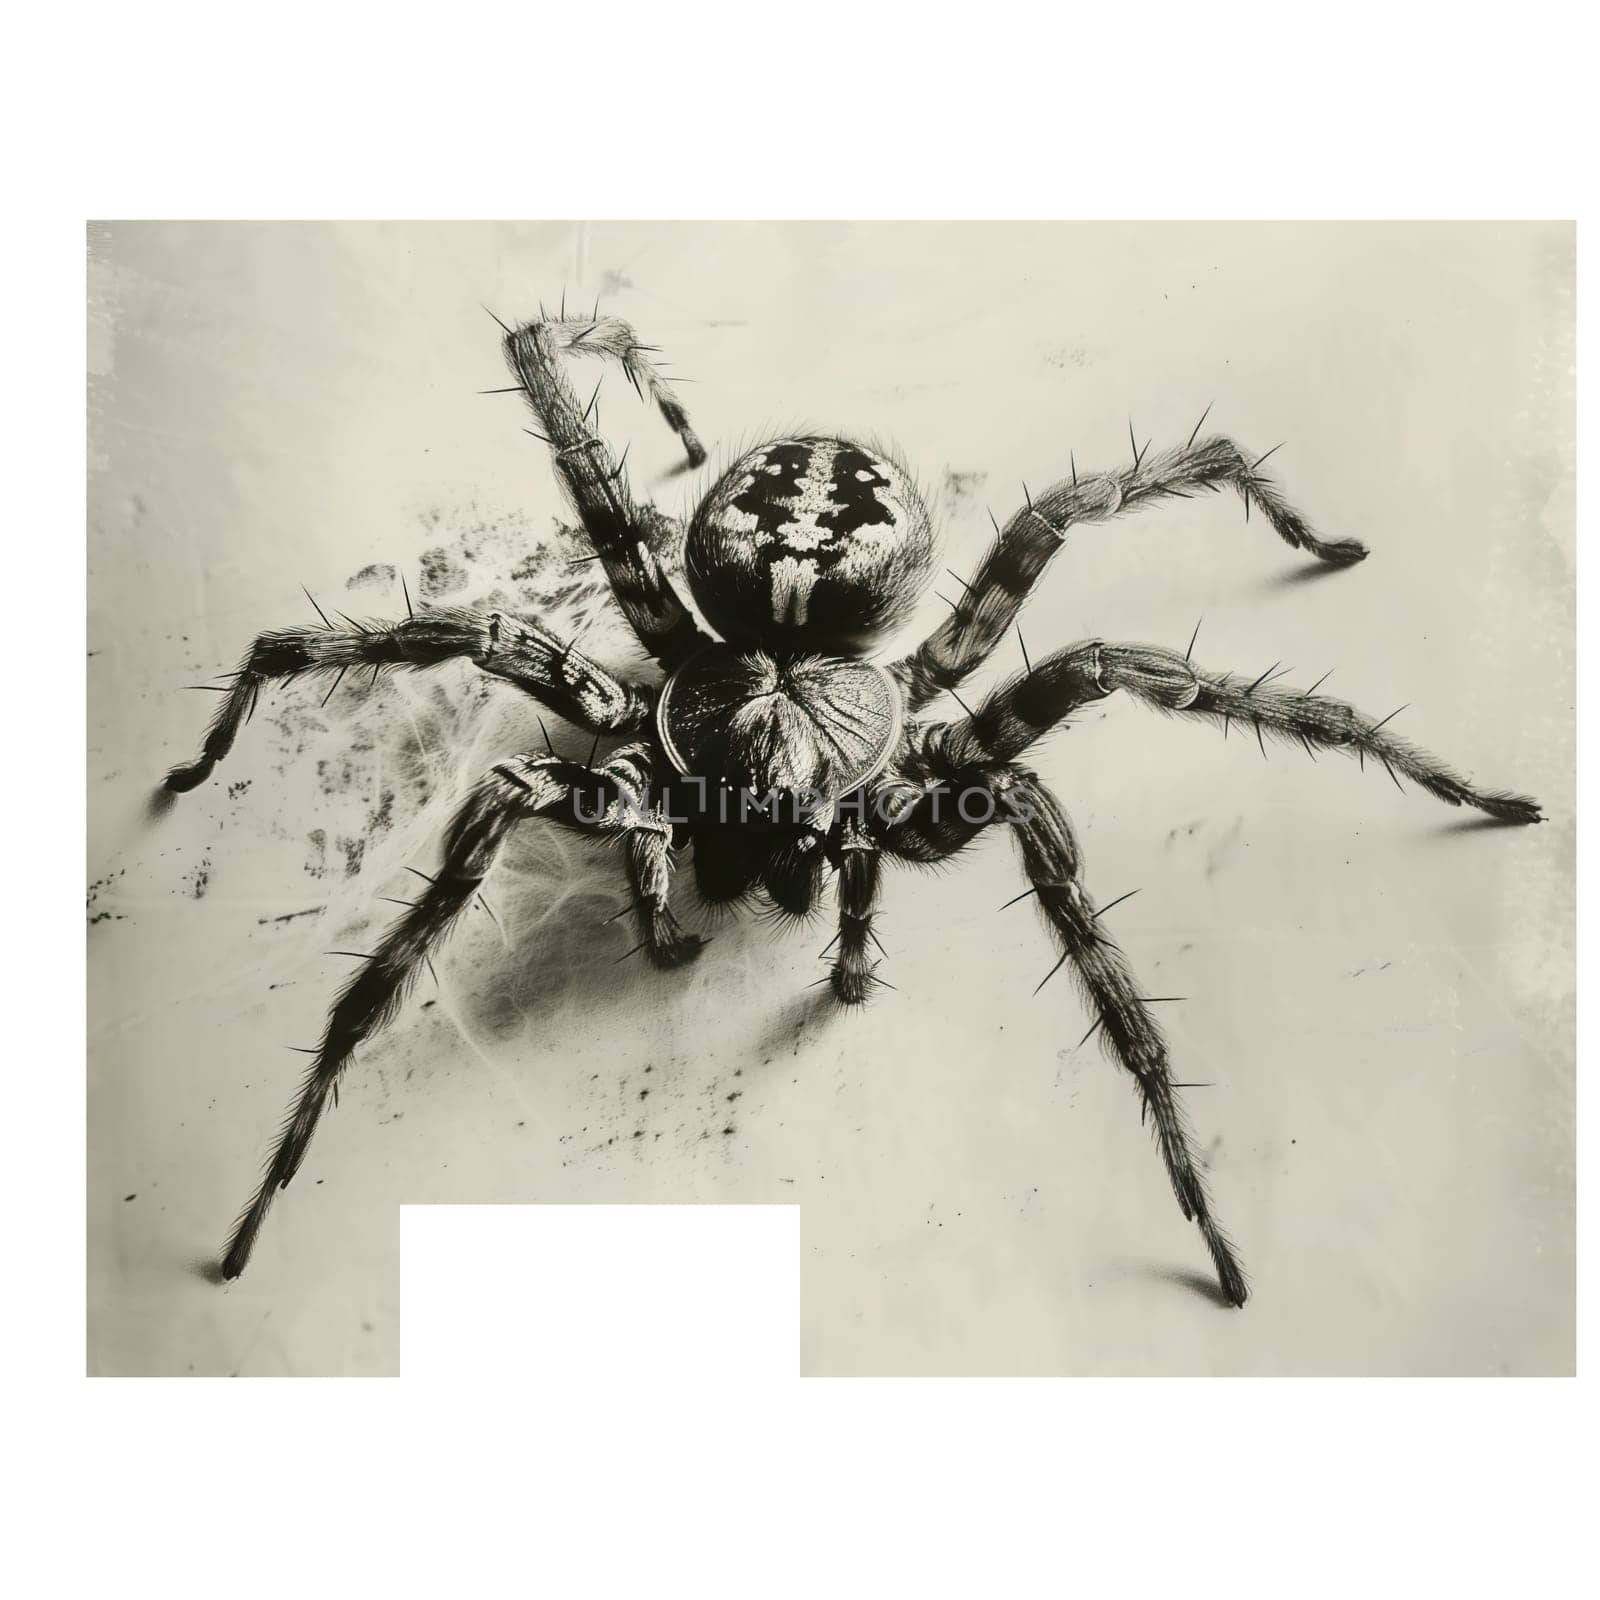 Monochrome vintage photo of halloween spider cut out image by Dustick